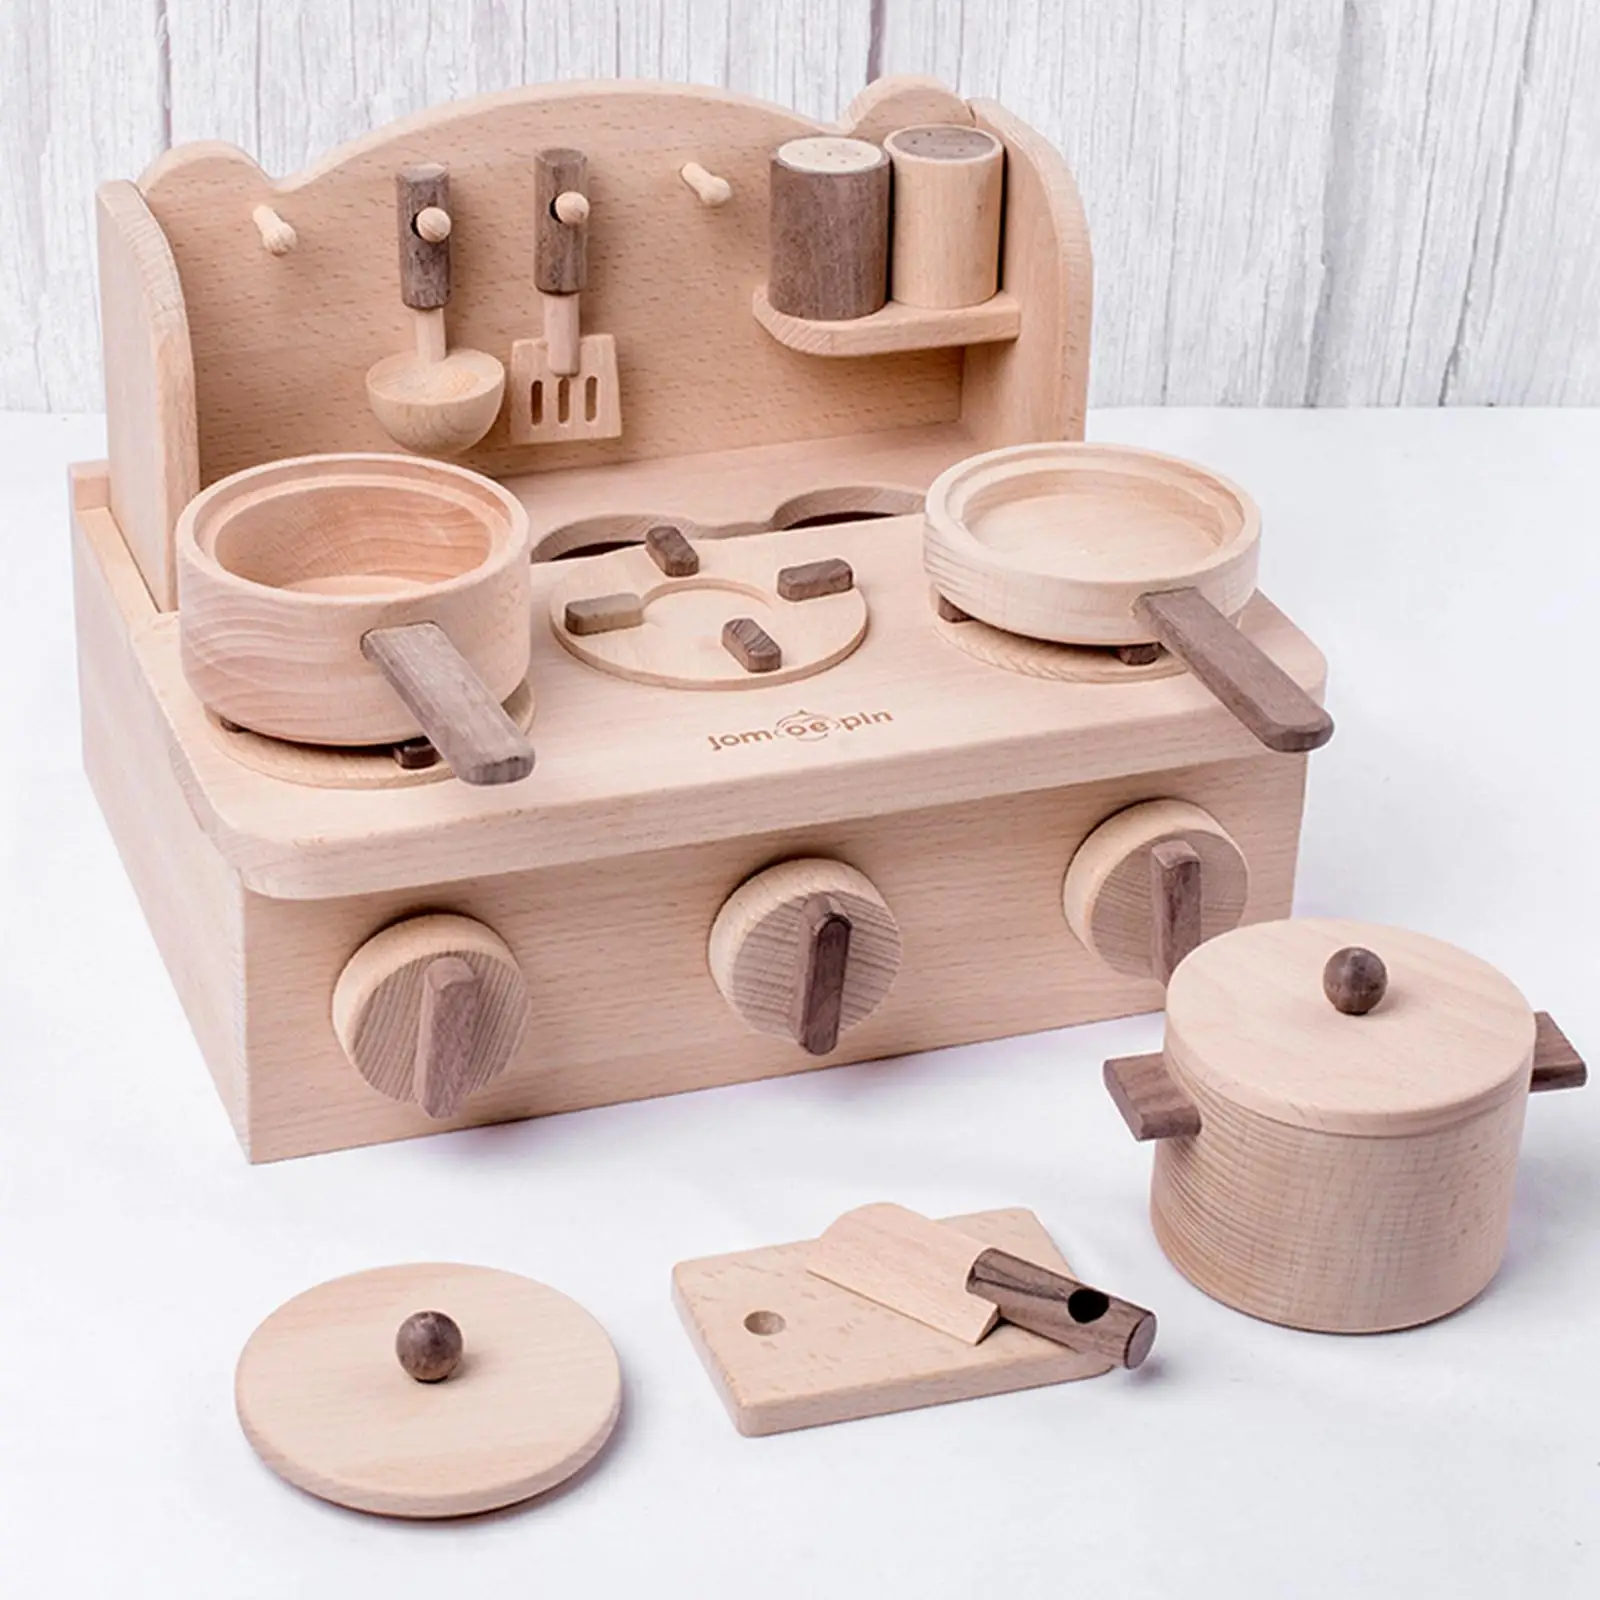 Wood Pretend Kitchen Playset Mini Kitchen Realistic Setup Cookware Accessories Gift Kitchen Play Toy Set for Toddlers Girls Boys